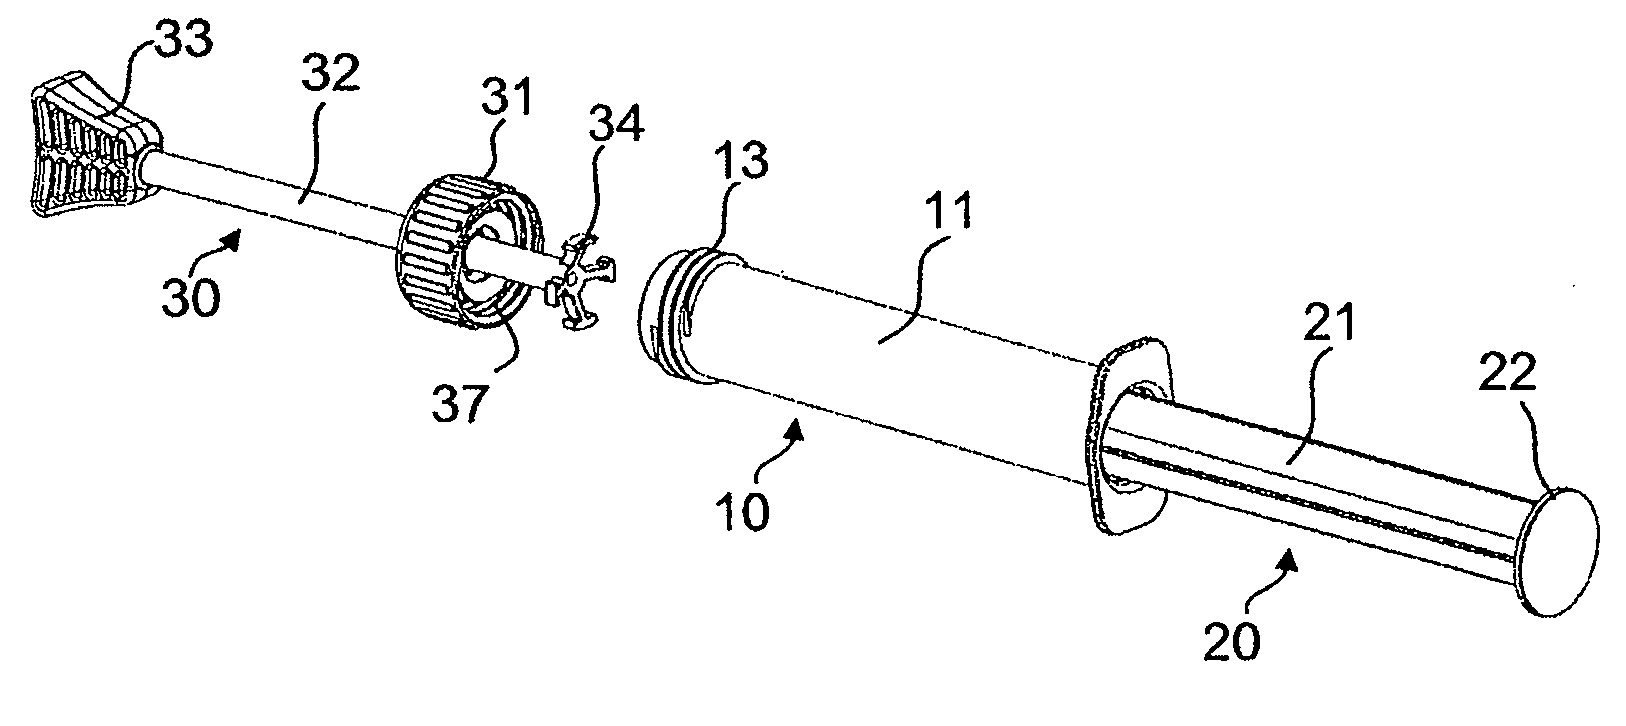 Syringe-like mixing device having a distally operable mixing element